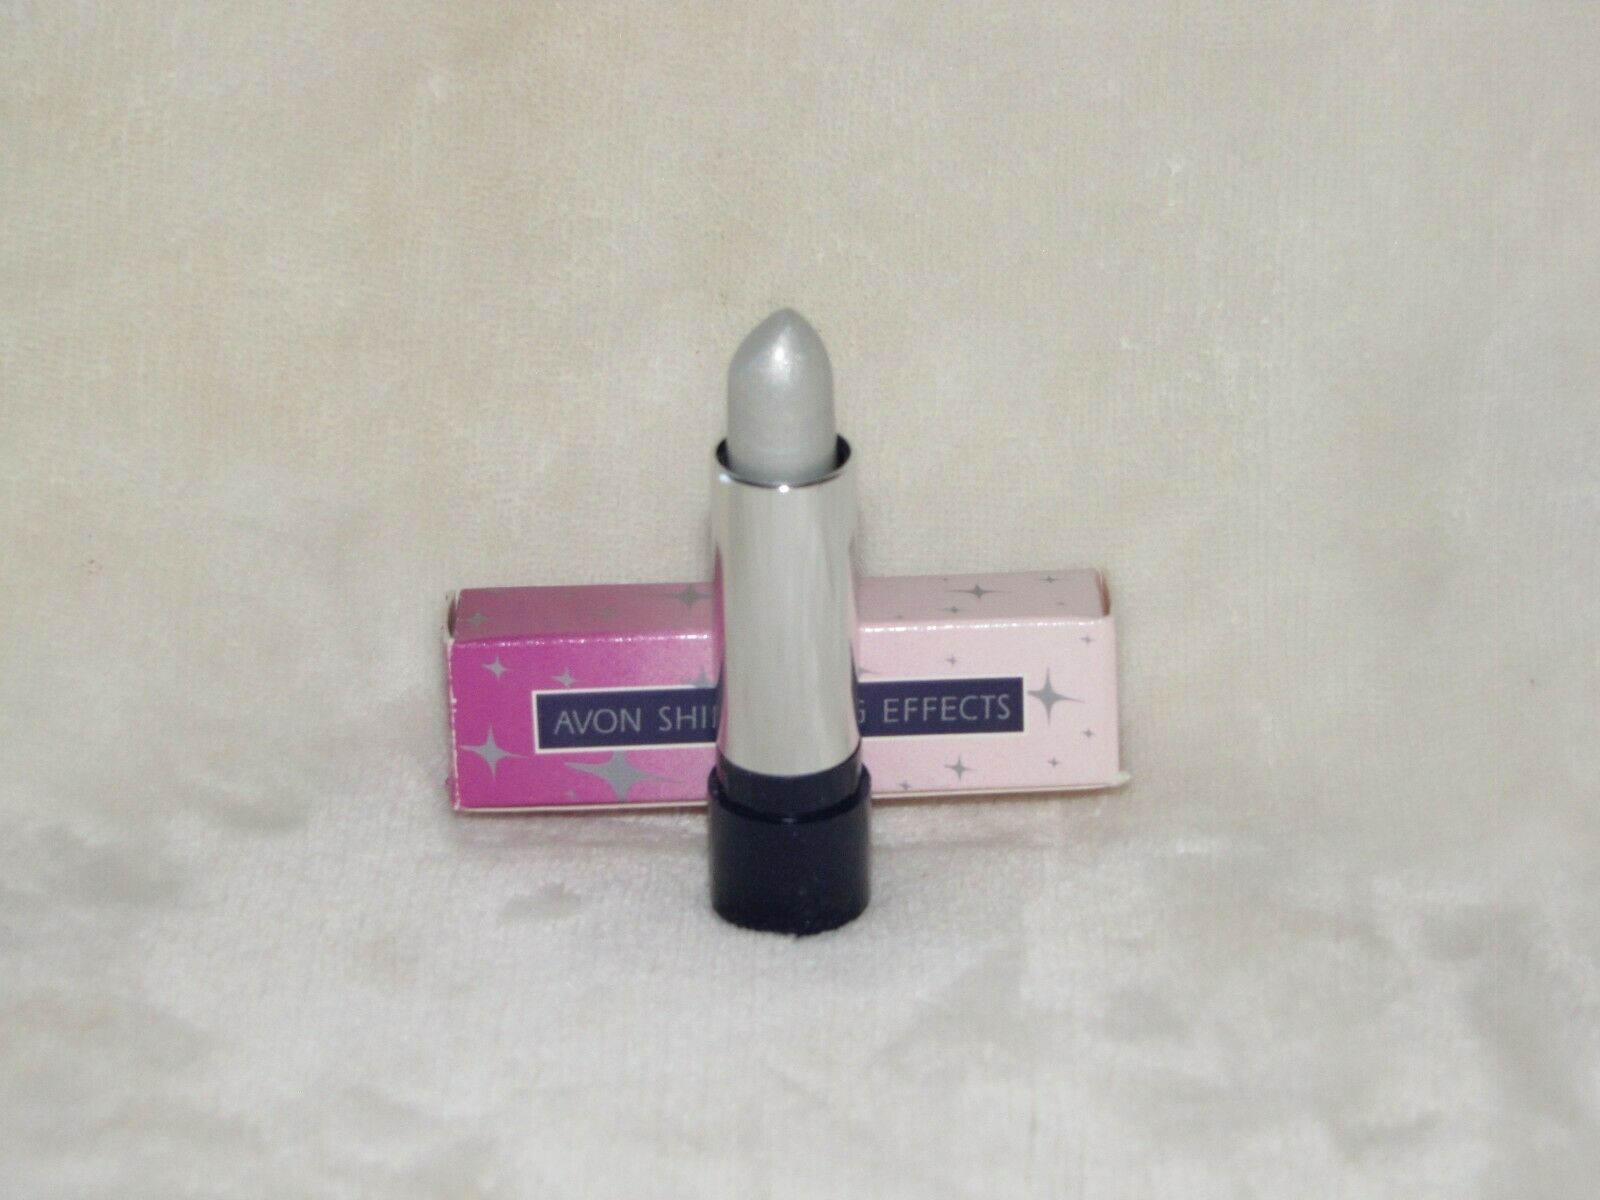 Primary image for Avon Shimmering Effects Vintage 1994 Lipstick 3.6 g .13 oz Silver